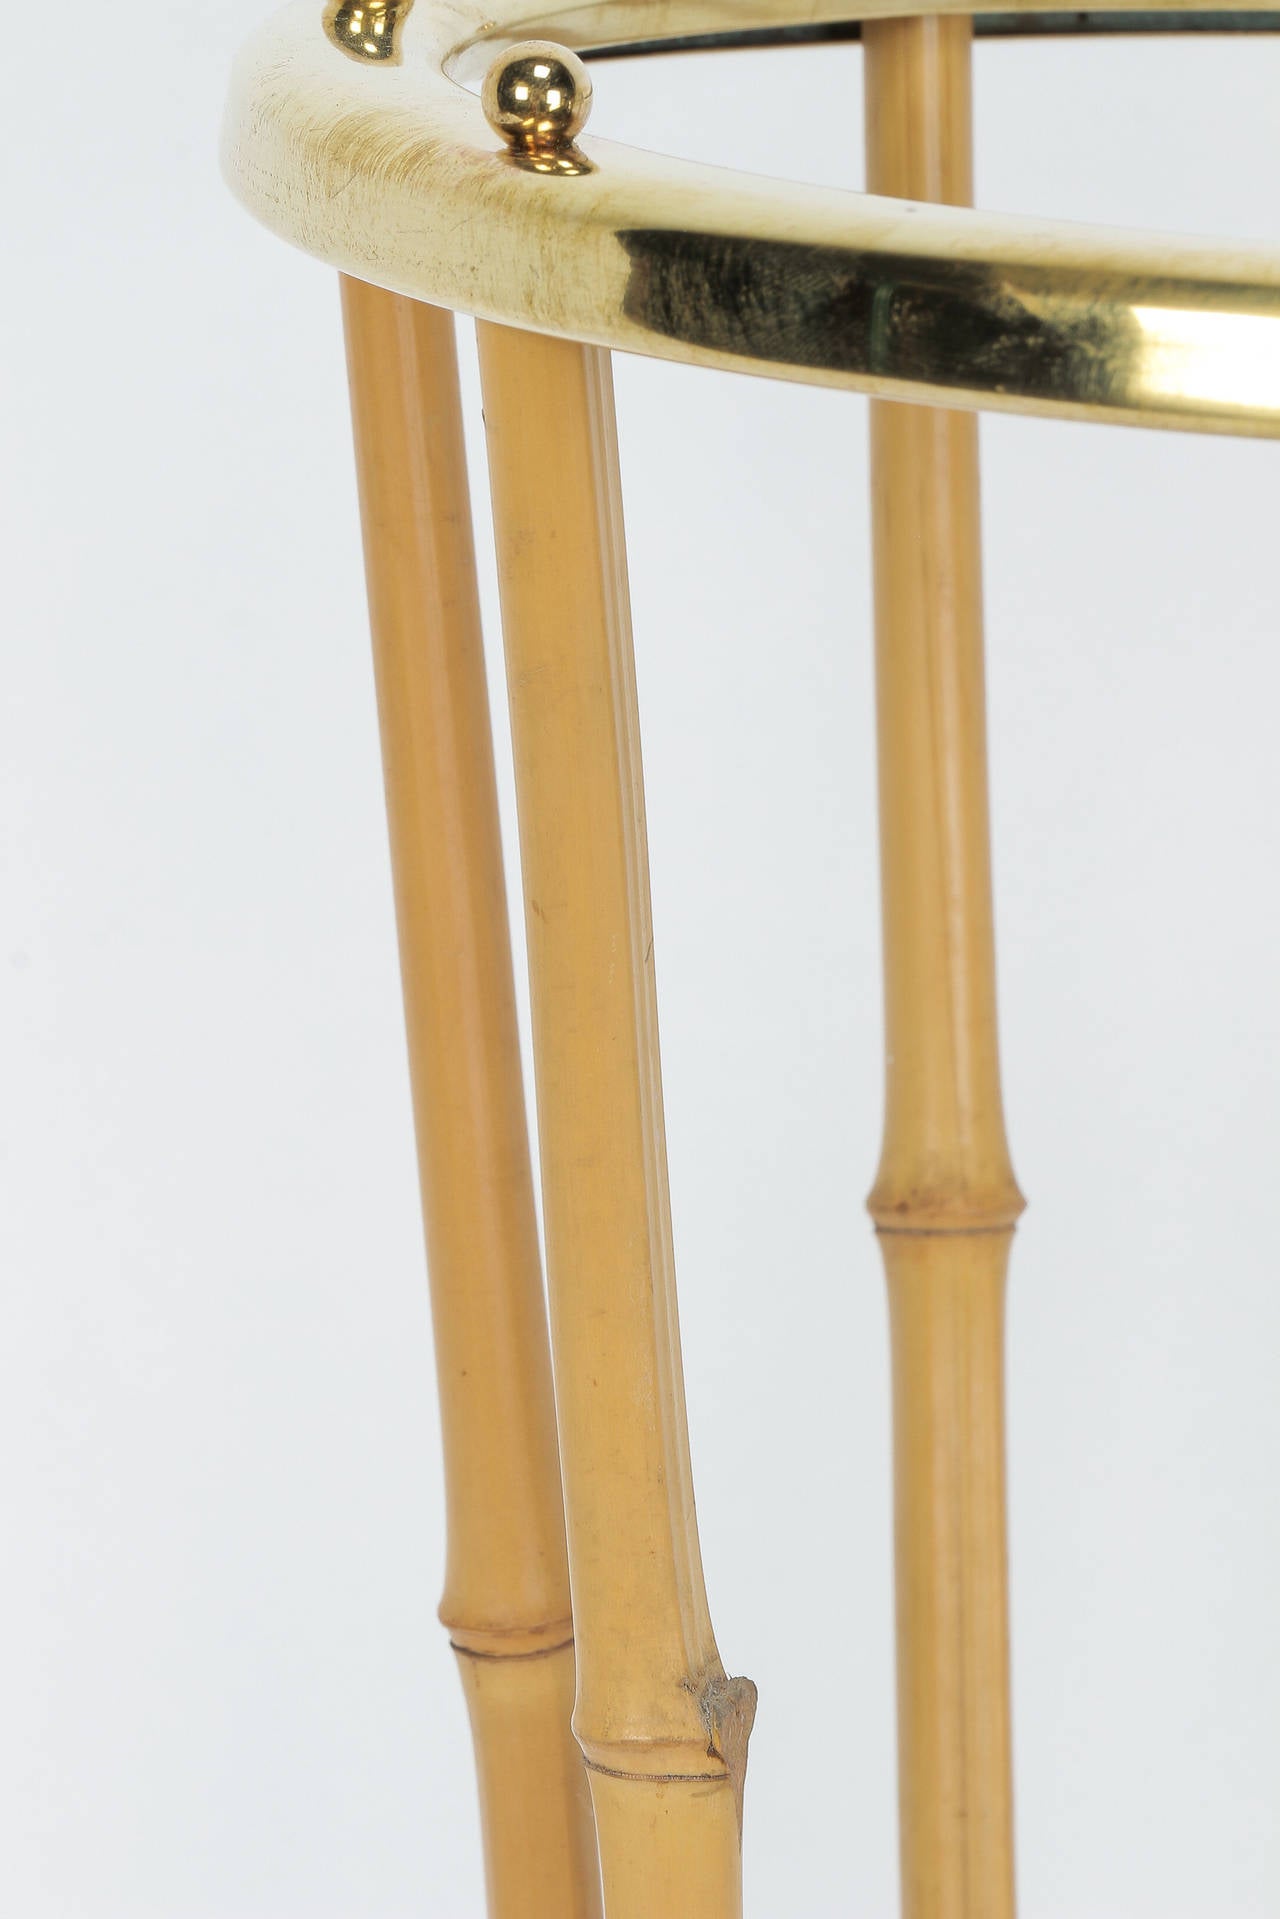 Austrian Bamboo and Brass Umbrella Stand in the Style of Carl Auböck, 1950s For Sale